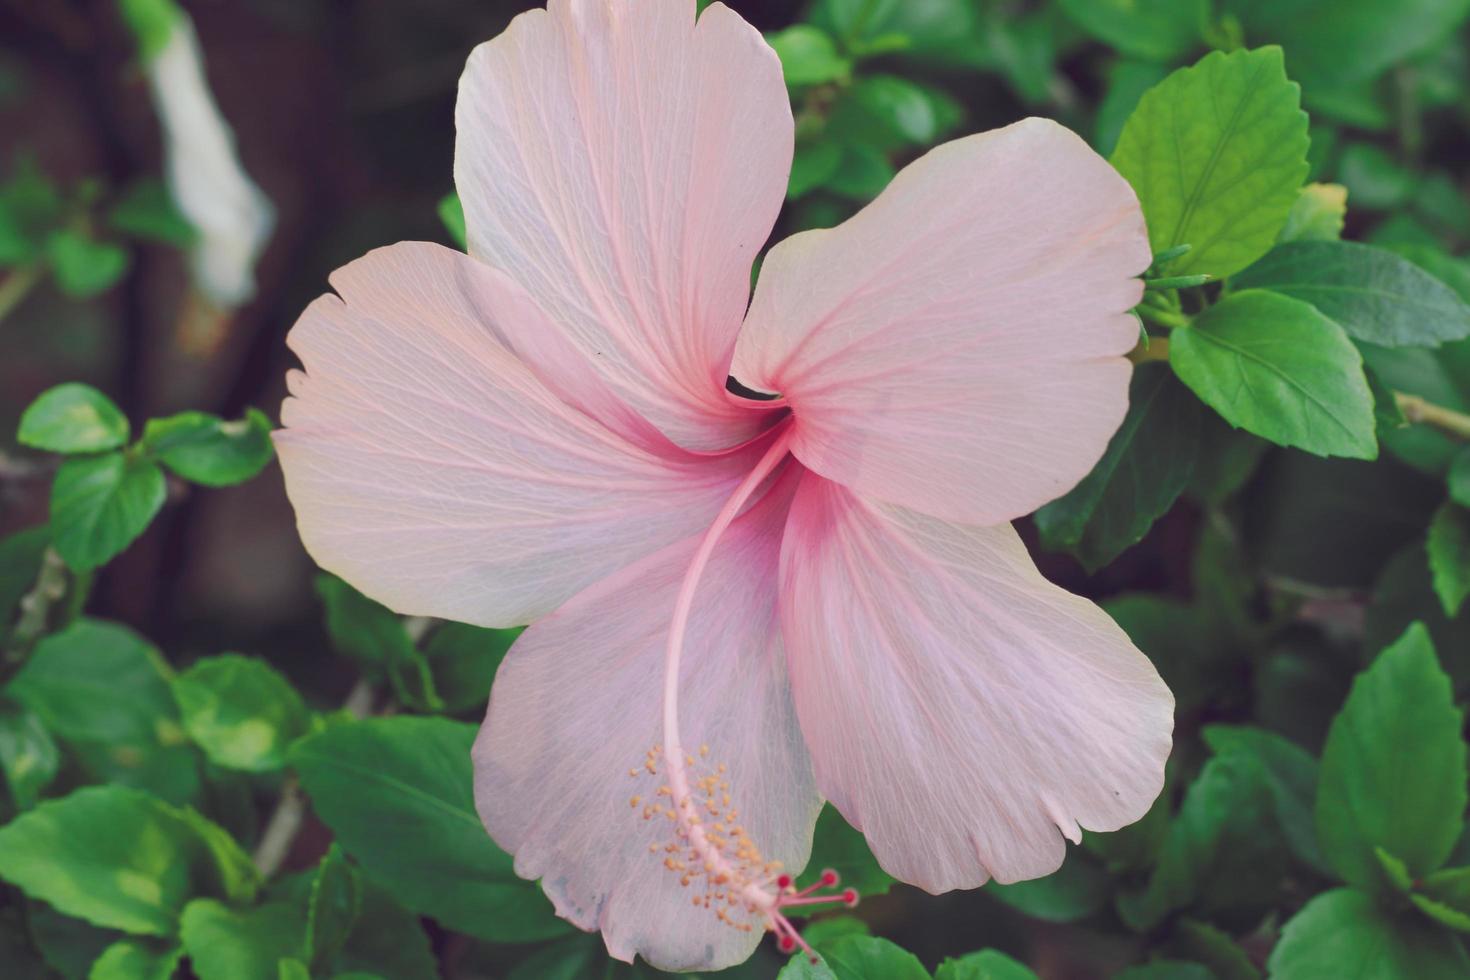 Pink hibiscus flower close-up photo